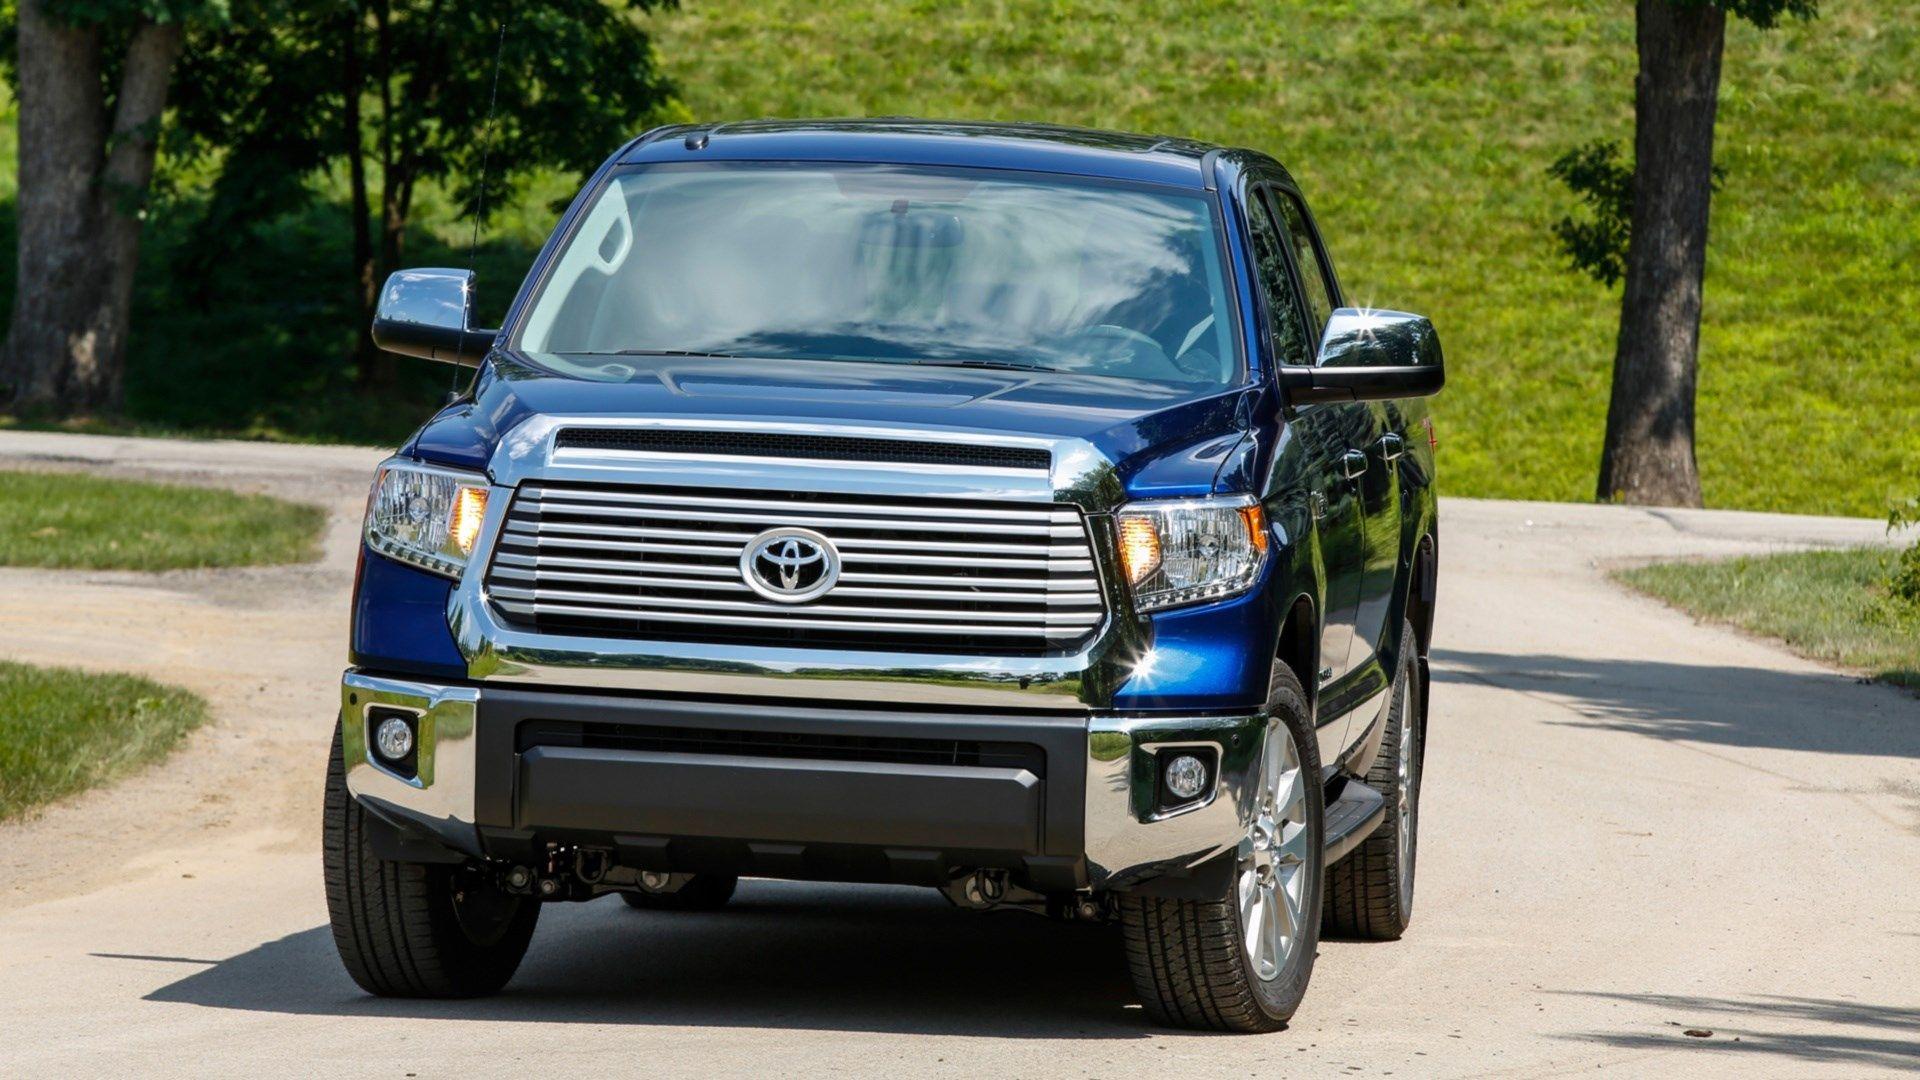 Free high resolution wallpapers toyota tundra